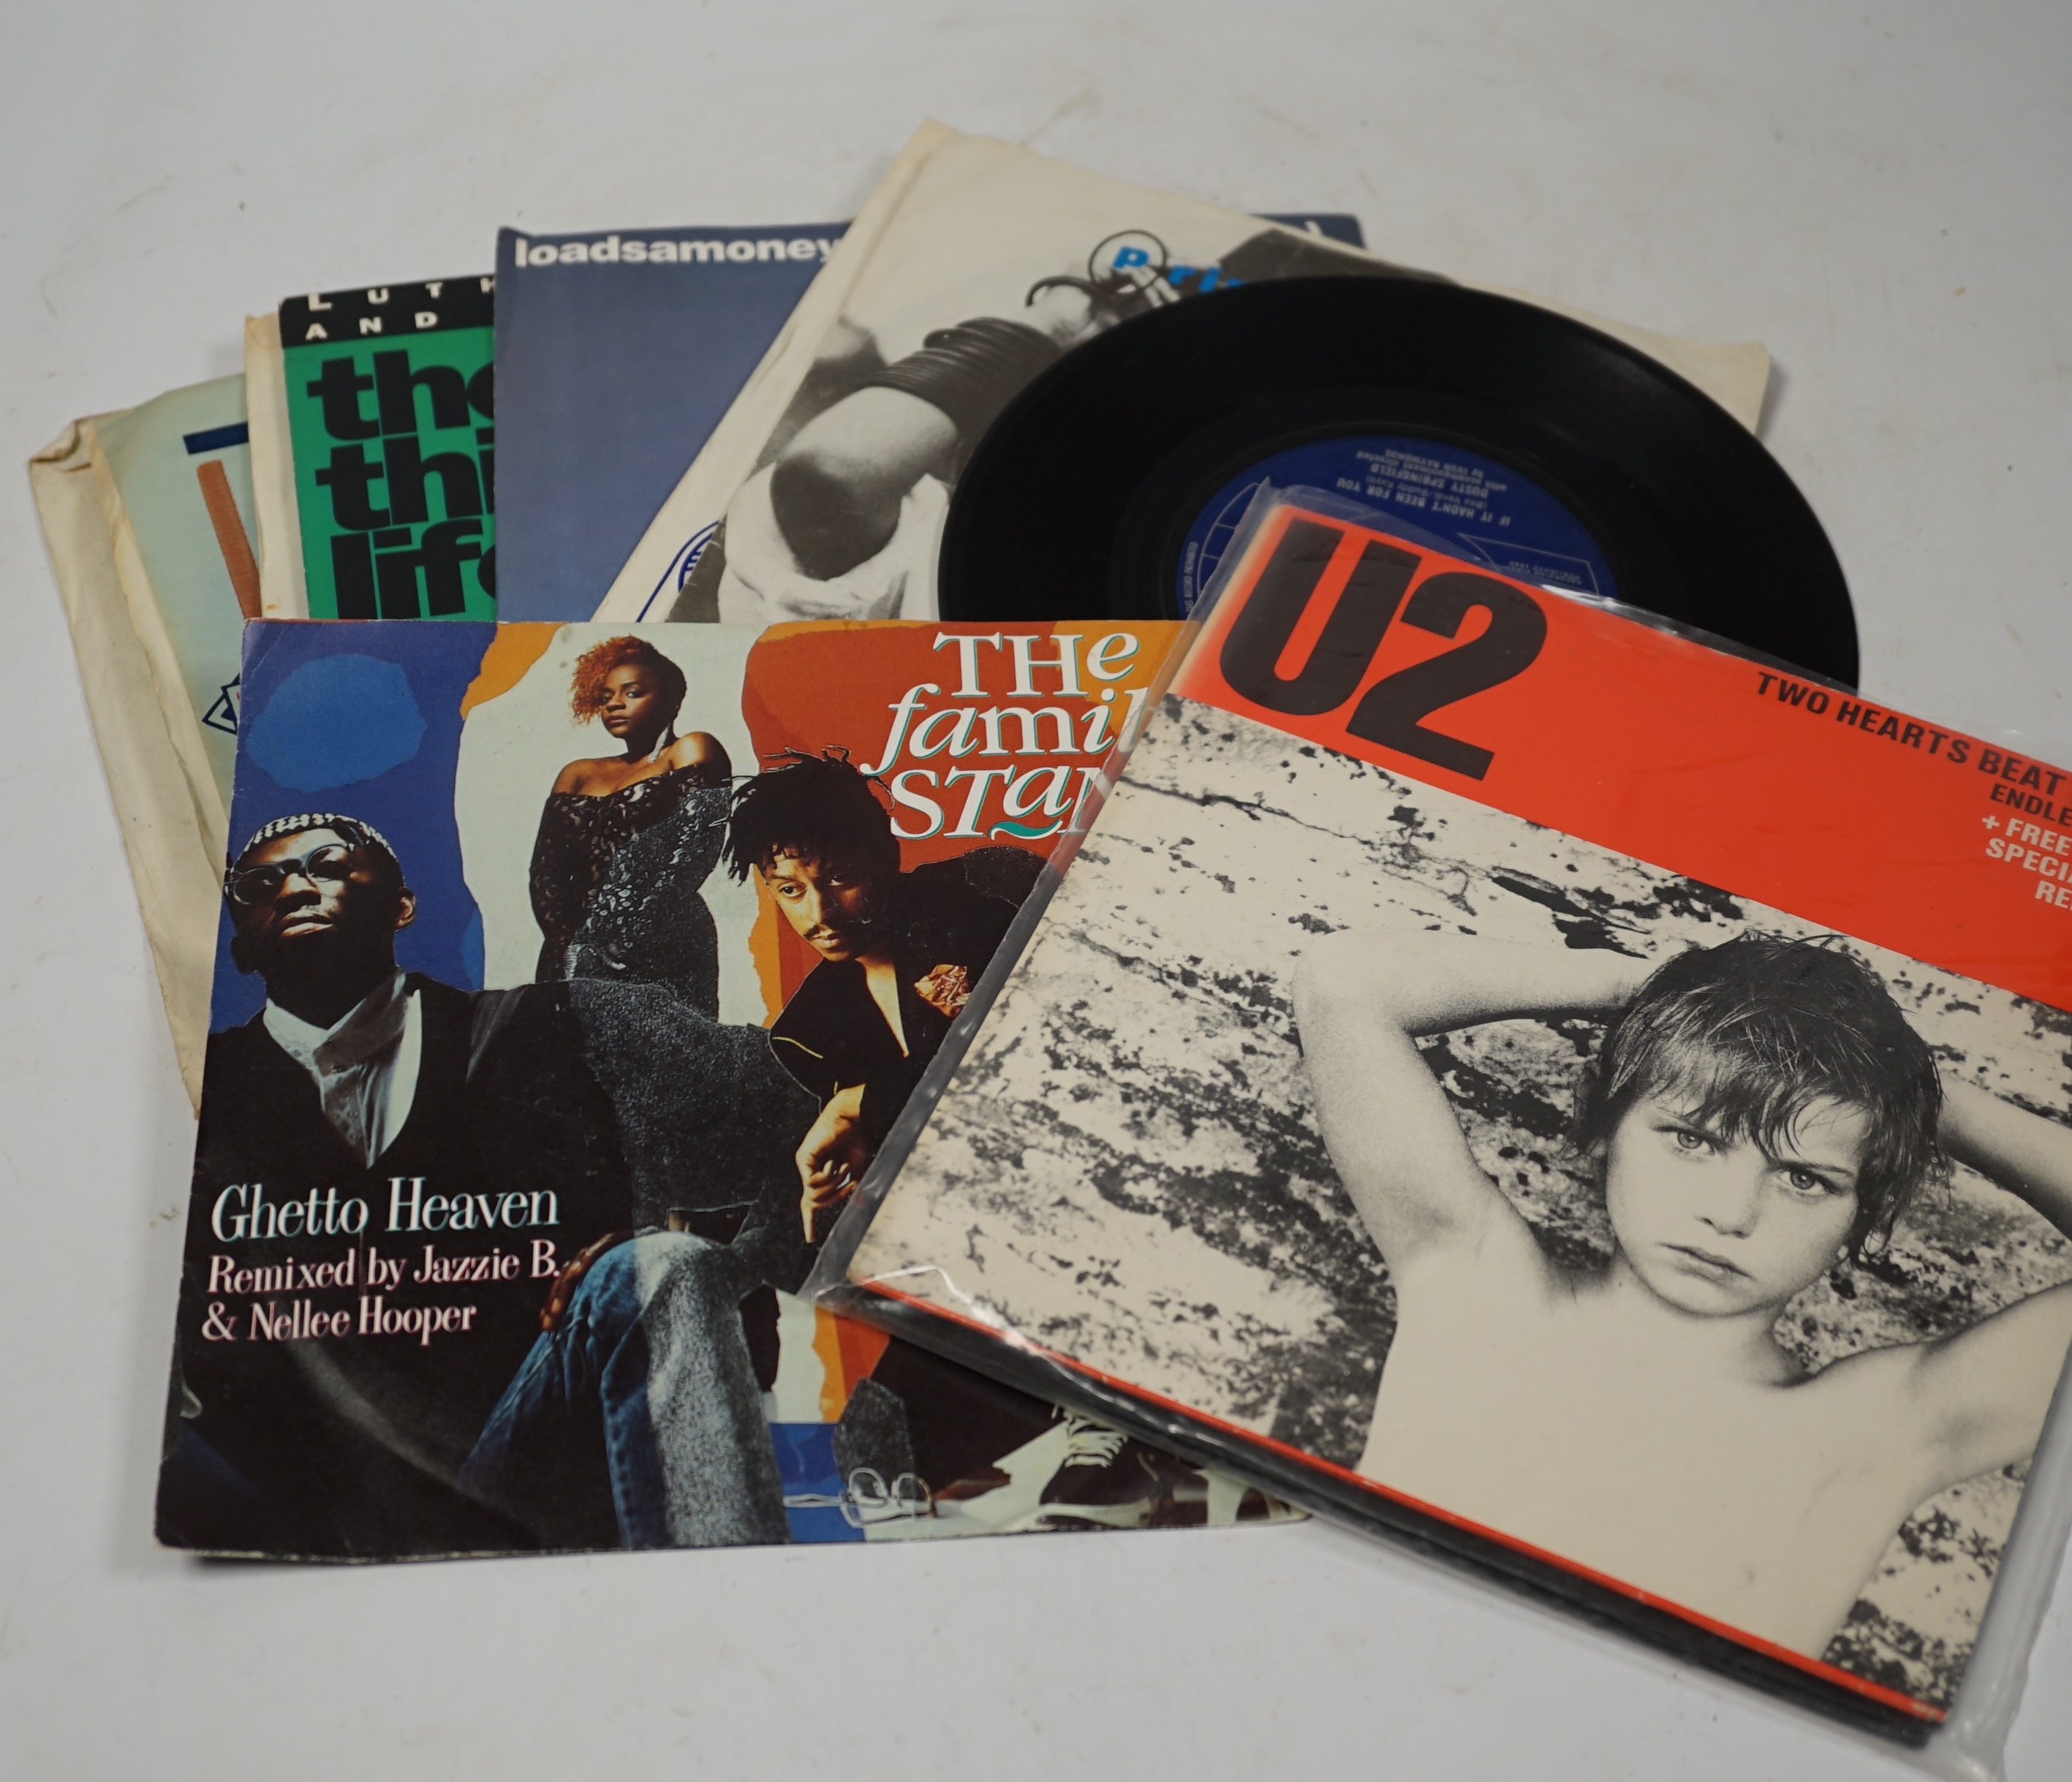 A collection of 7 inch singles, mainly 1970s and 1980s artists including; U2, Dusty Springfield, Kate Bush, The Human League, the Animals, Kim Wilde, Madonna, Rod Stewart, The Dave Clark Five, the Pogues, Meat Loaf, ABBA